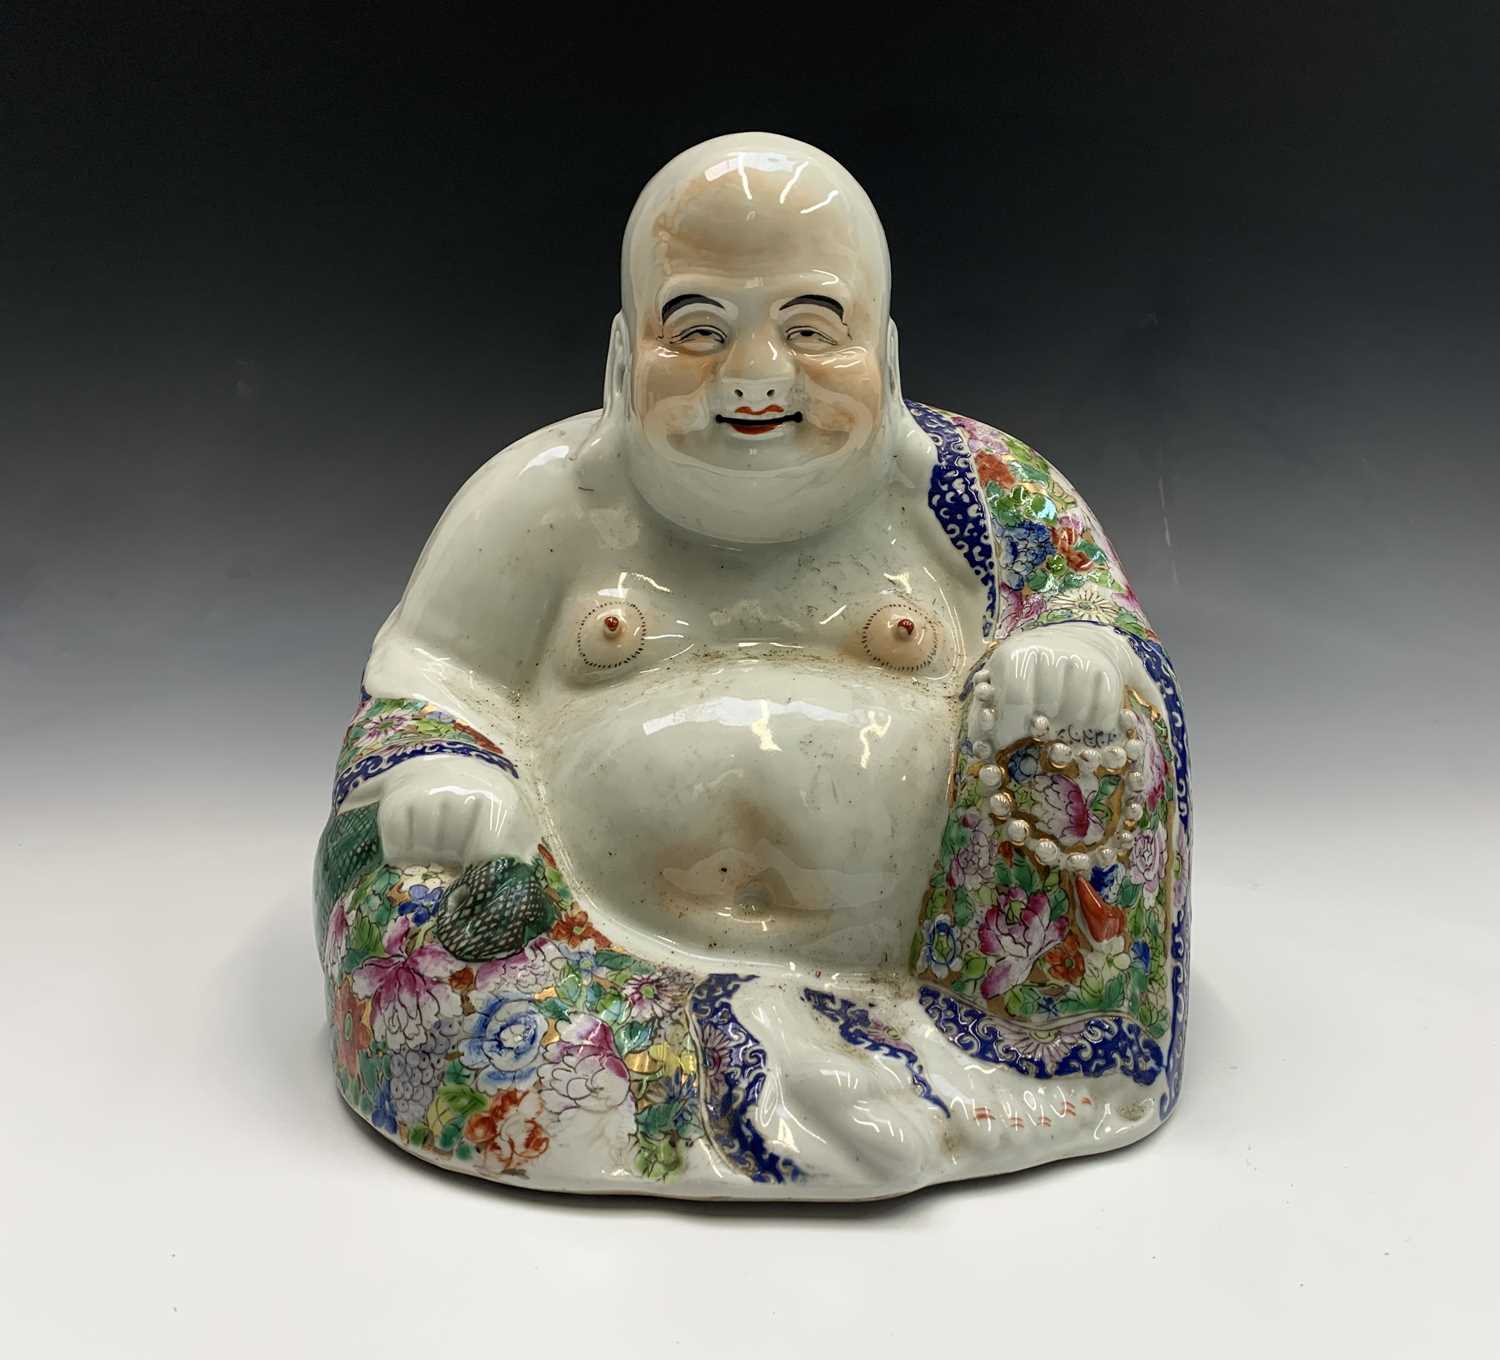 A large Chinese porcelain figure of a seated Buddah, 20th century, wearing a floral decorated robe - Image 7 of 15